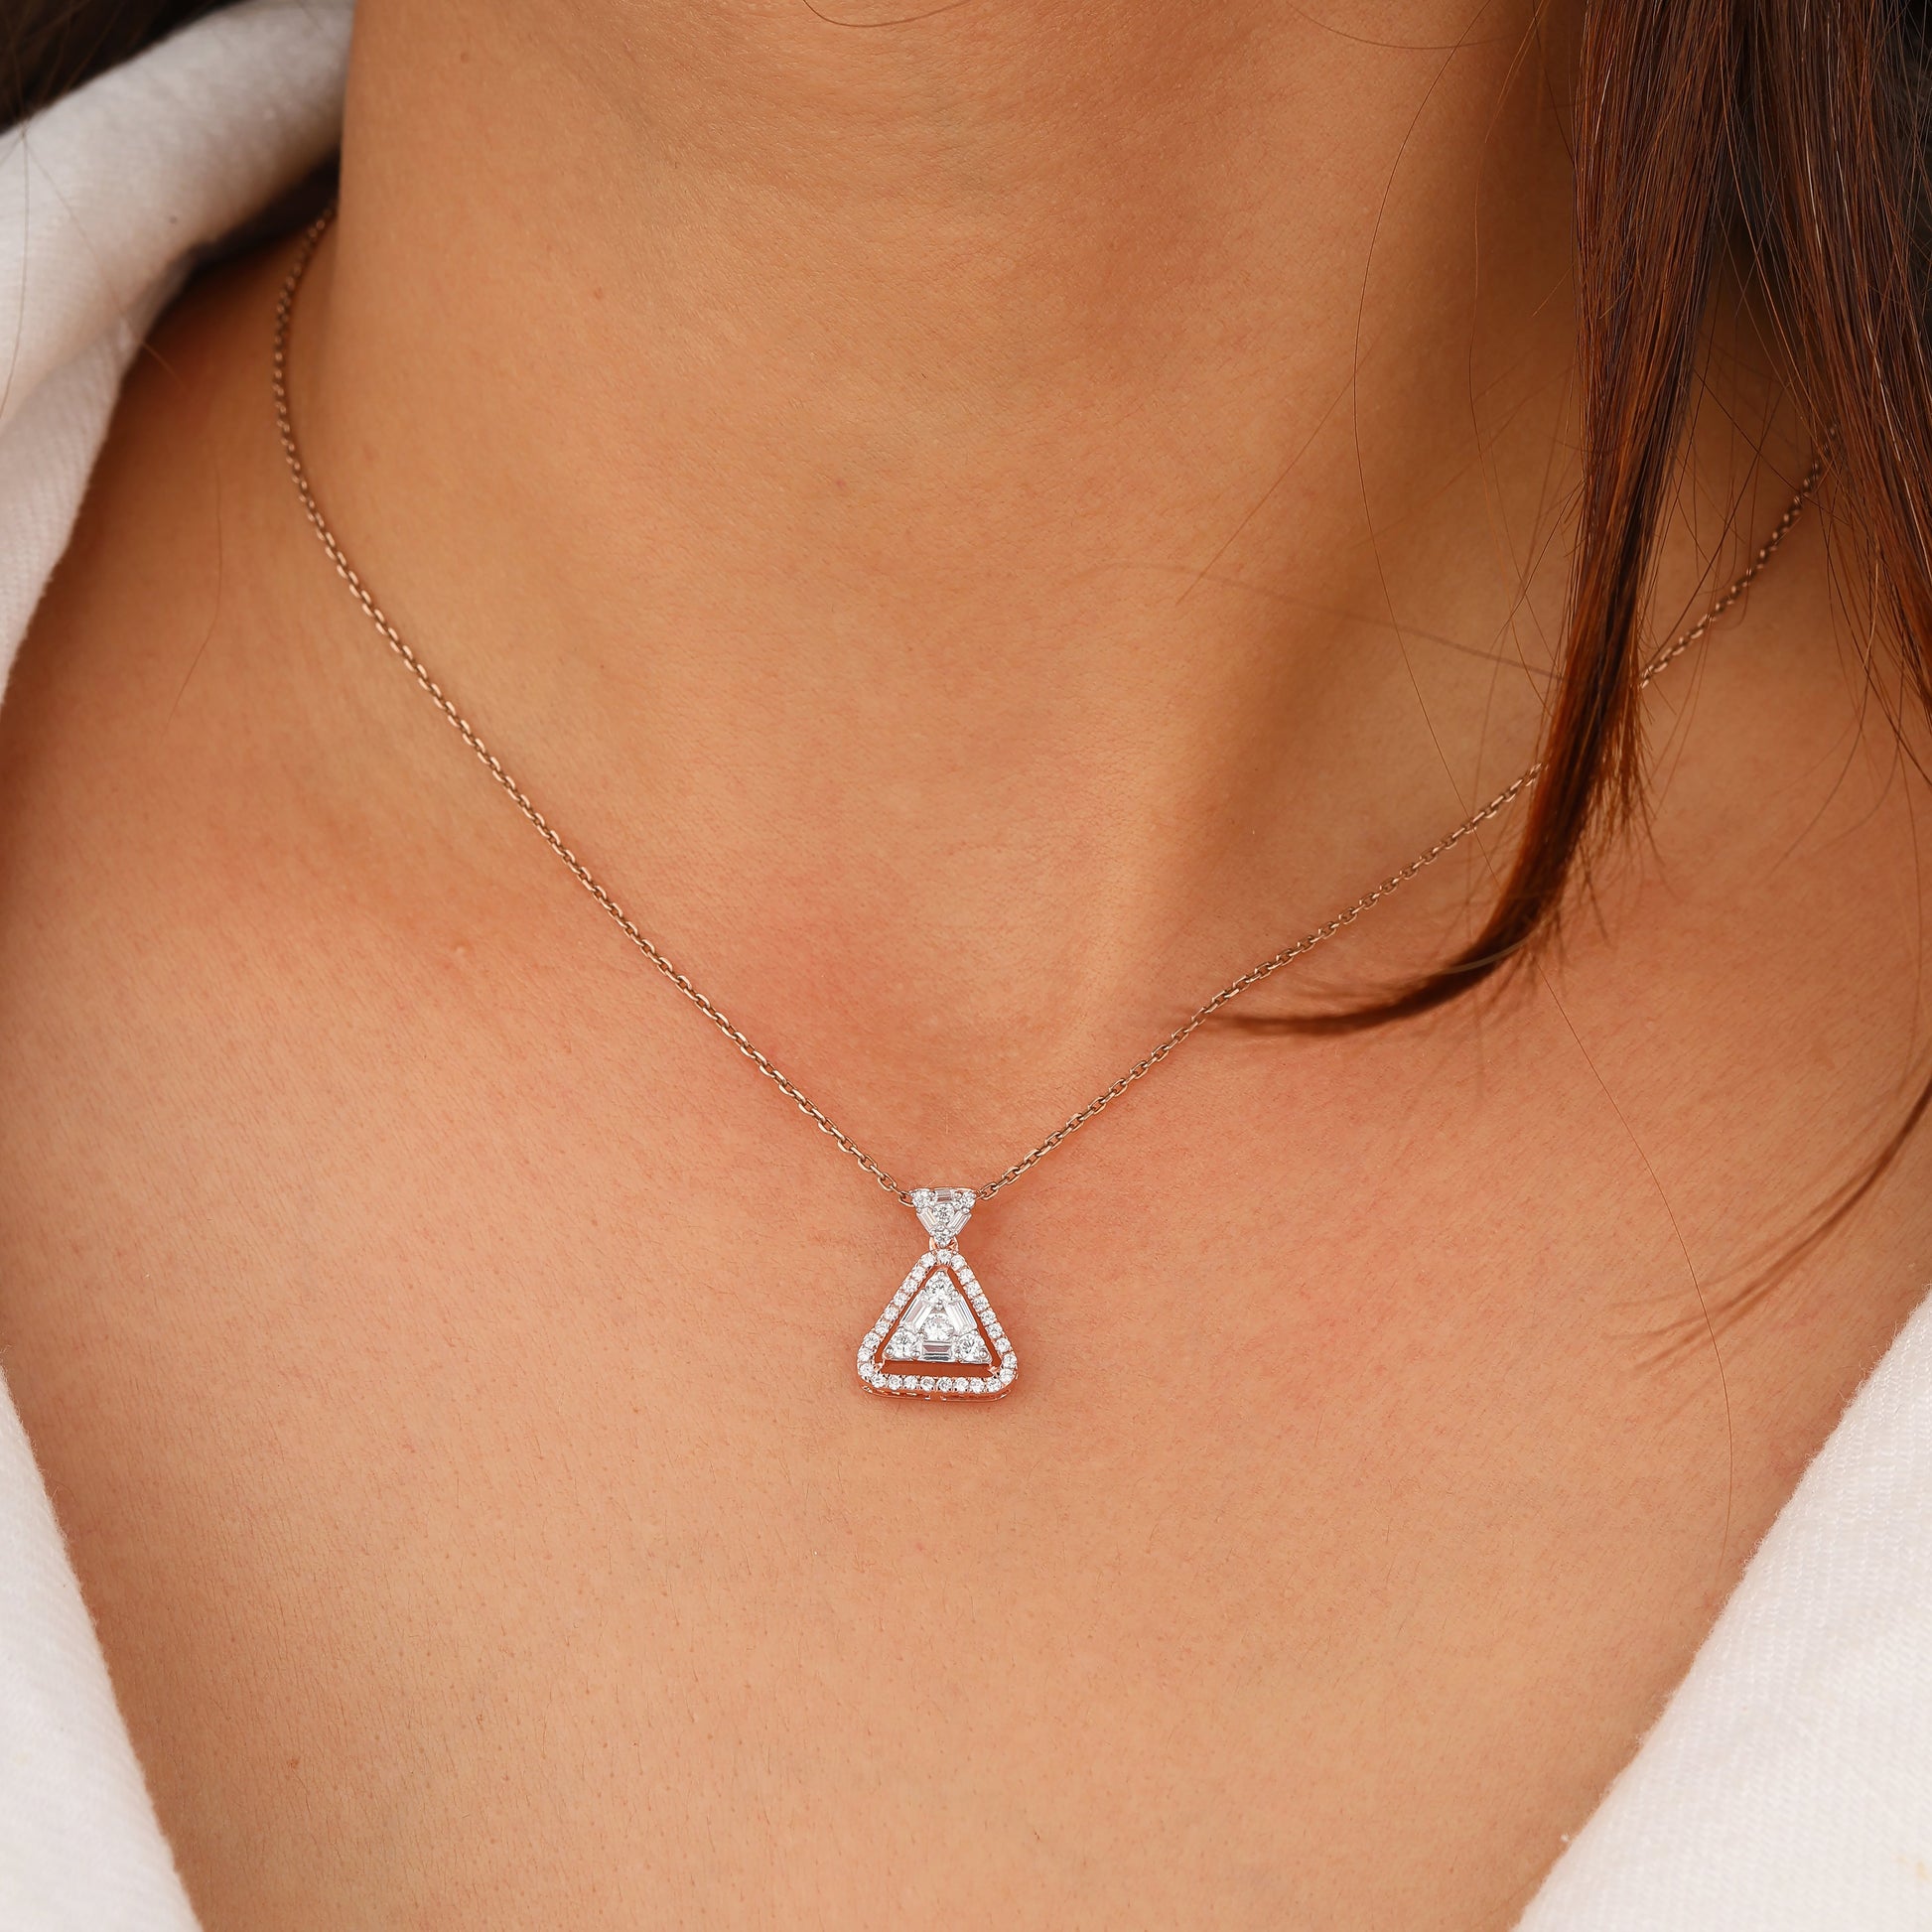 Baguette Diamond Necklace for her